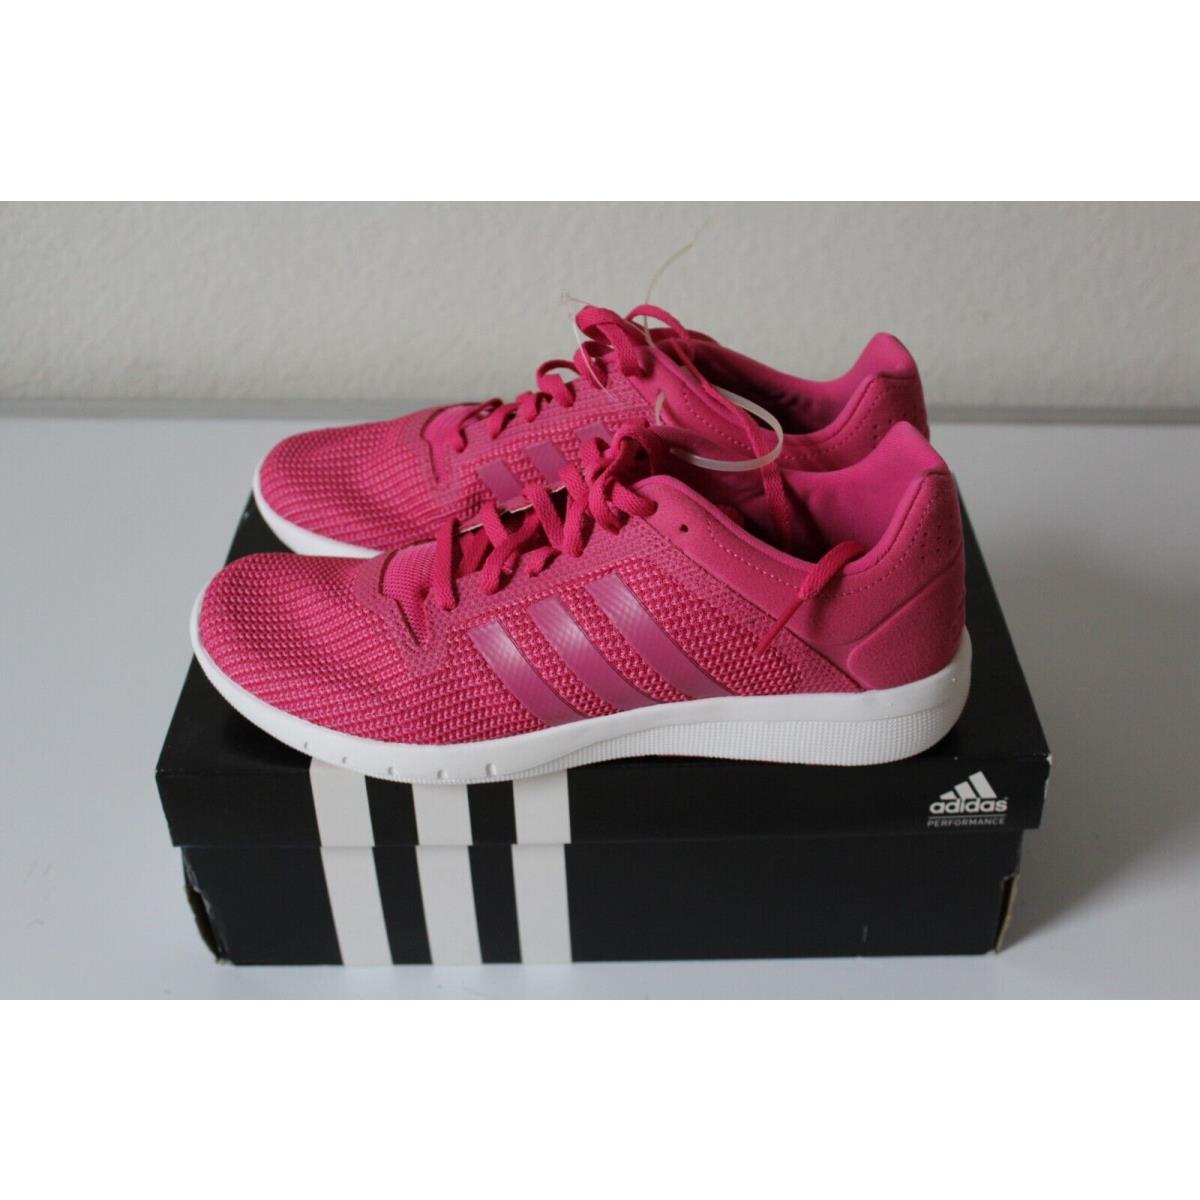 nice to meet you sleeve Silver with Box Adidas CC Fresh 2 W Women Running Shoes B40626 Pink/white Size 9.5  | 692740222677 - Adidas shoes - Pink | SporTipTop